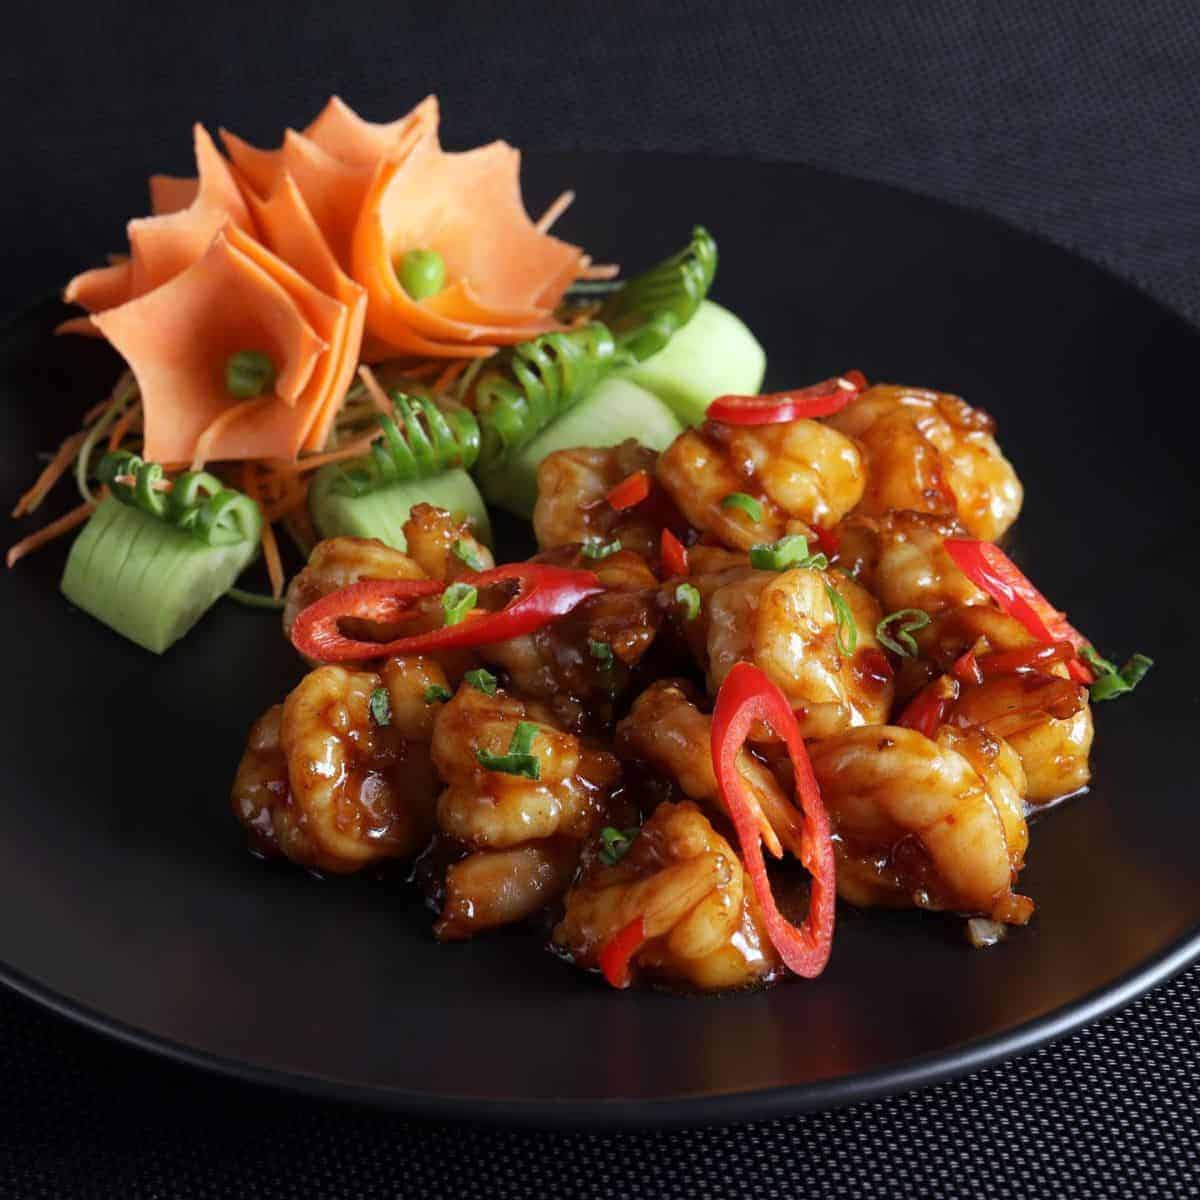 spicy Chinese shrimp dish with vegetable embellishments